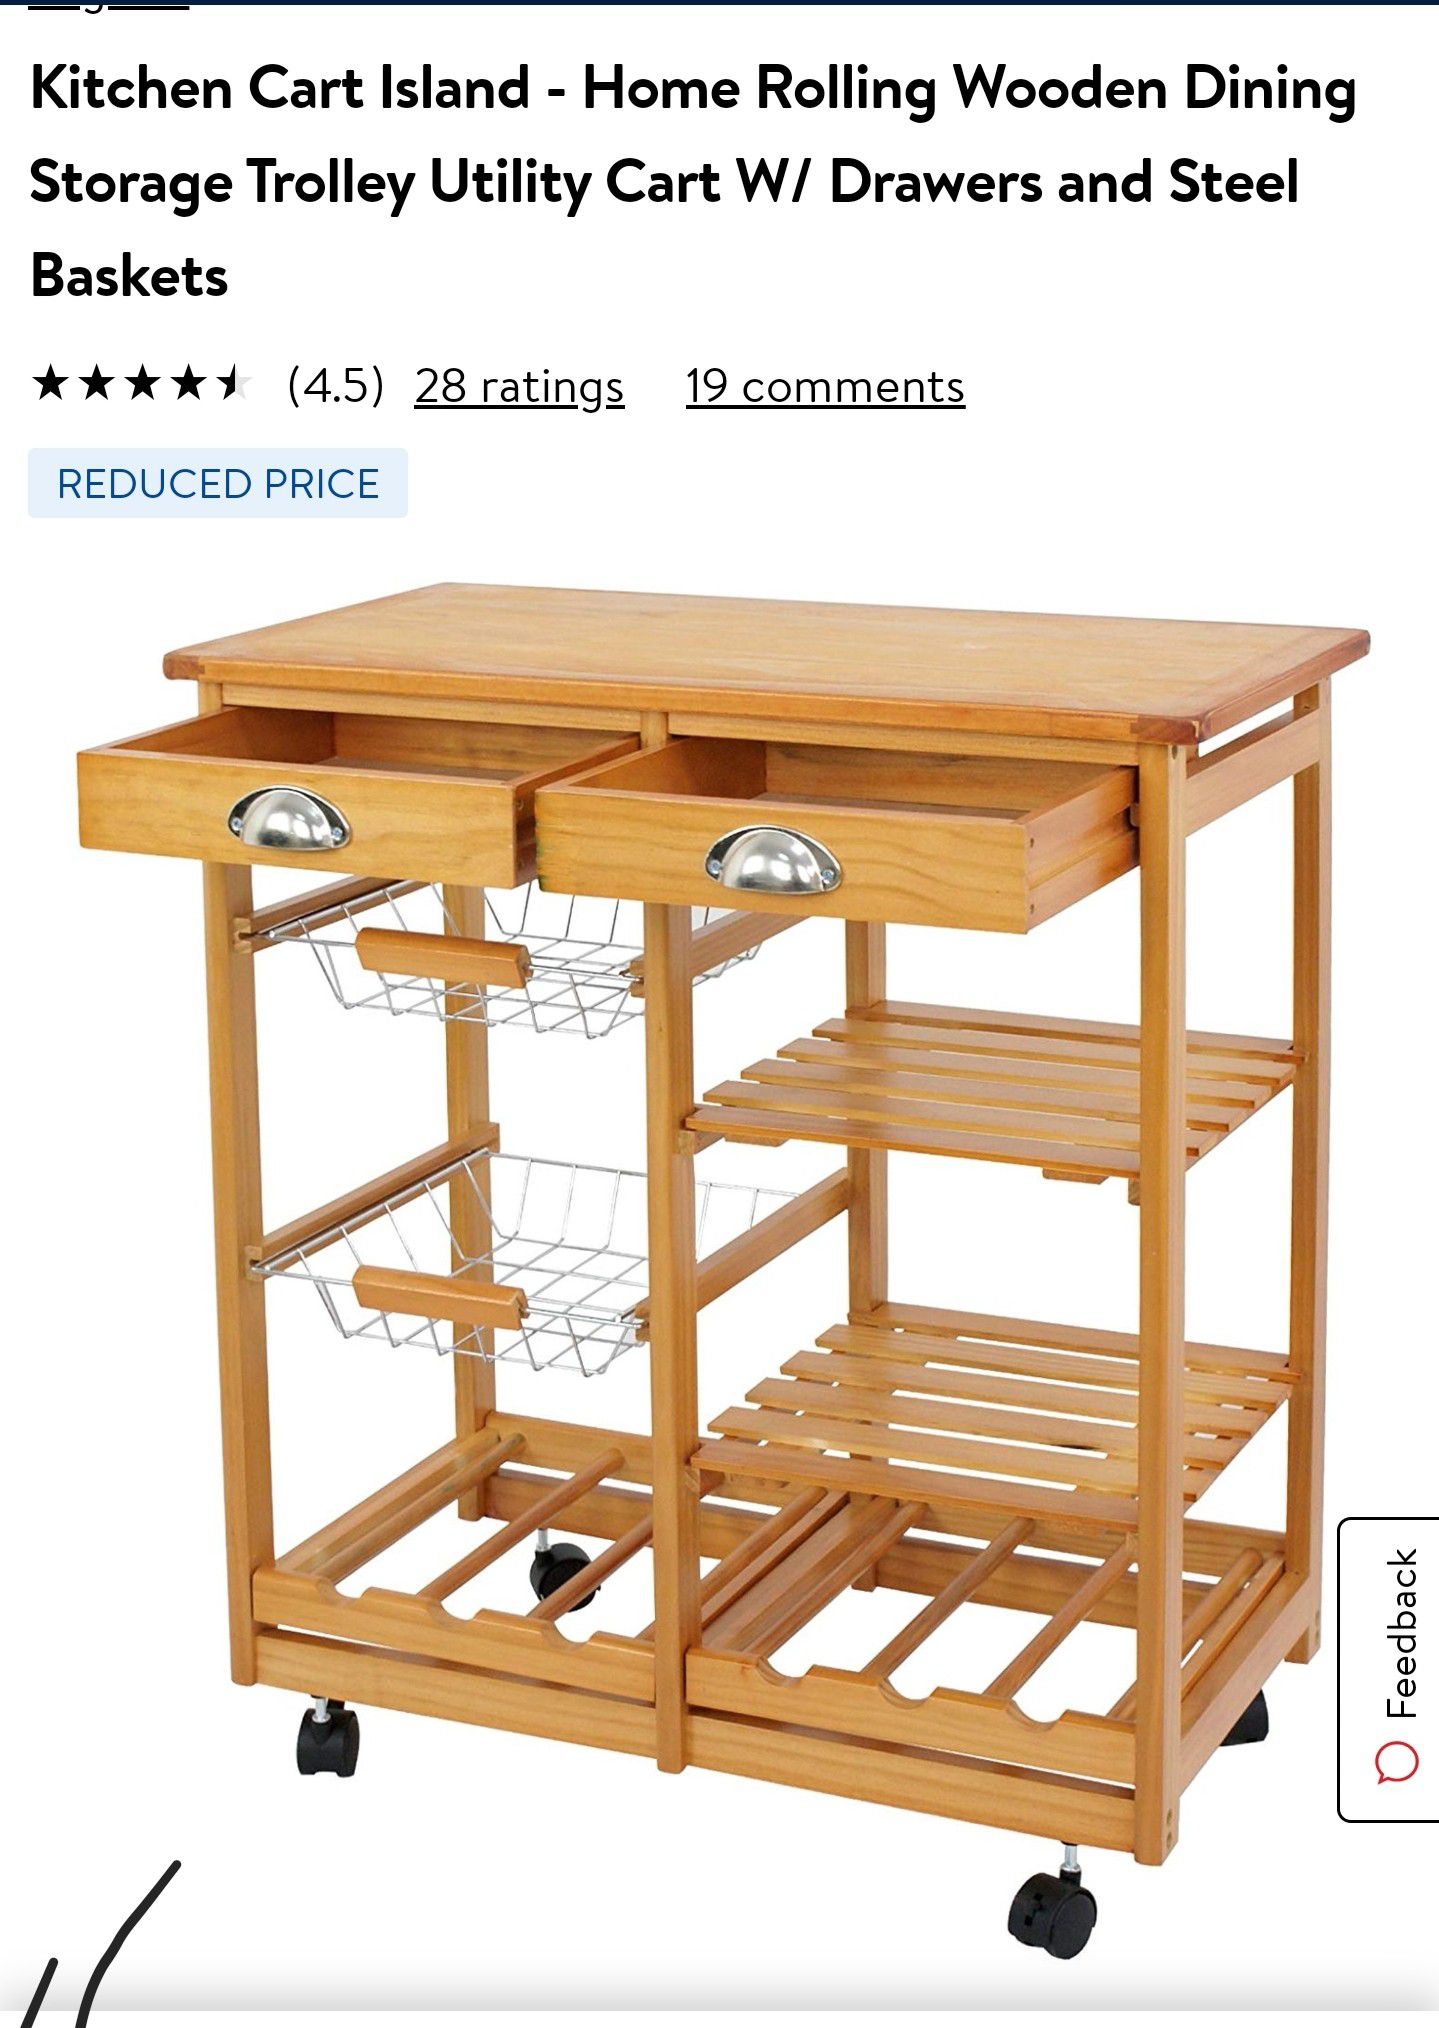 Kitchen cart island,home rolling wooden dining storache trolley utility cart.